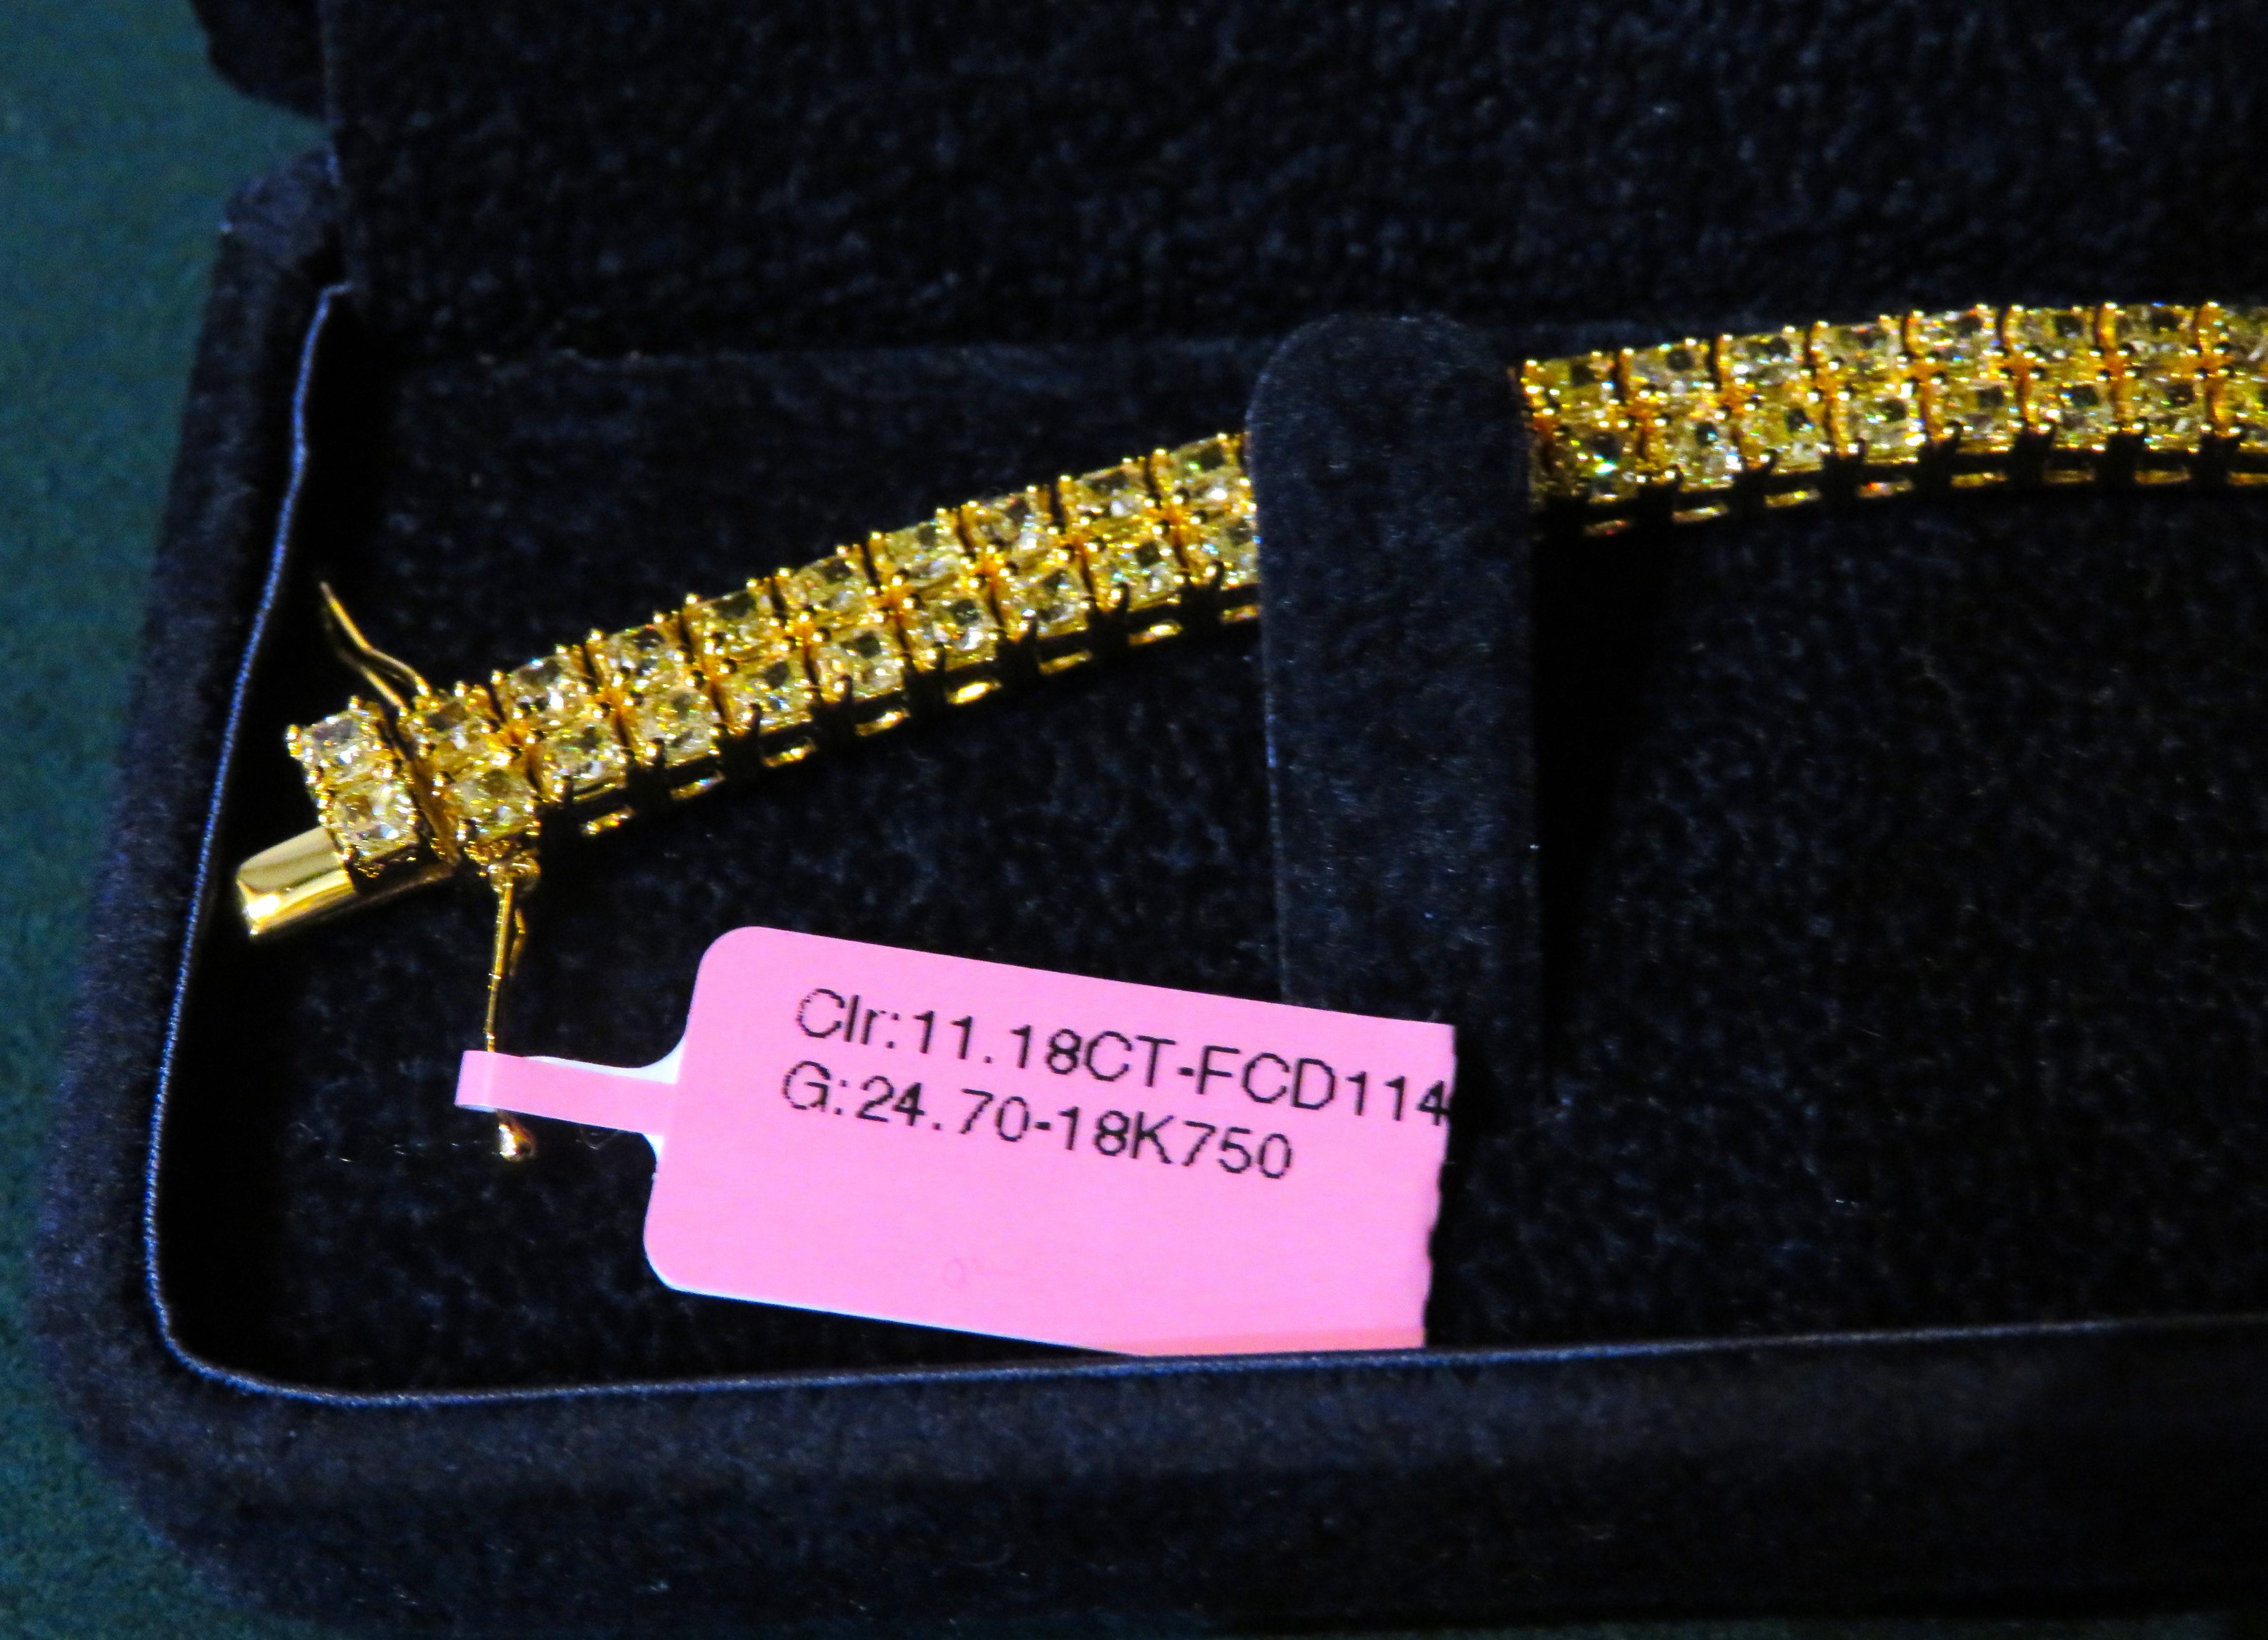 The Following Item we are offering is a Rare Important Radiant 18KT Gold Fancy Yellow Diamond Bracelet! This Magnificent Fancy Yellow Diamond Bracelet has over 11CTS of Fine Fancy Yellow Diamonds!! This Gorgeous Bracelet is a Rare Masterpiece from a